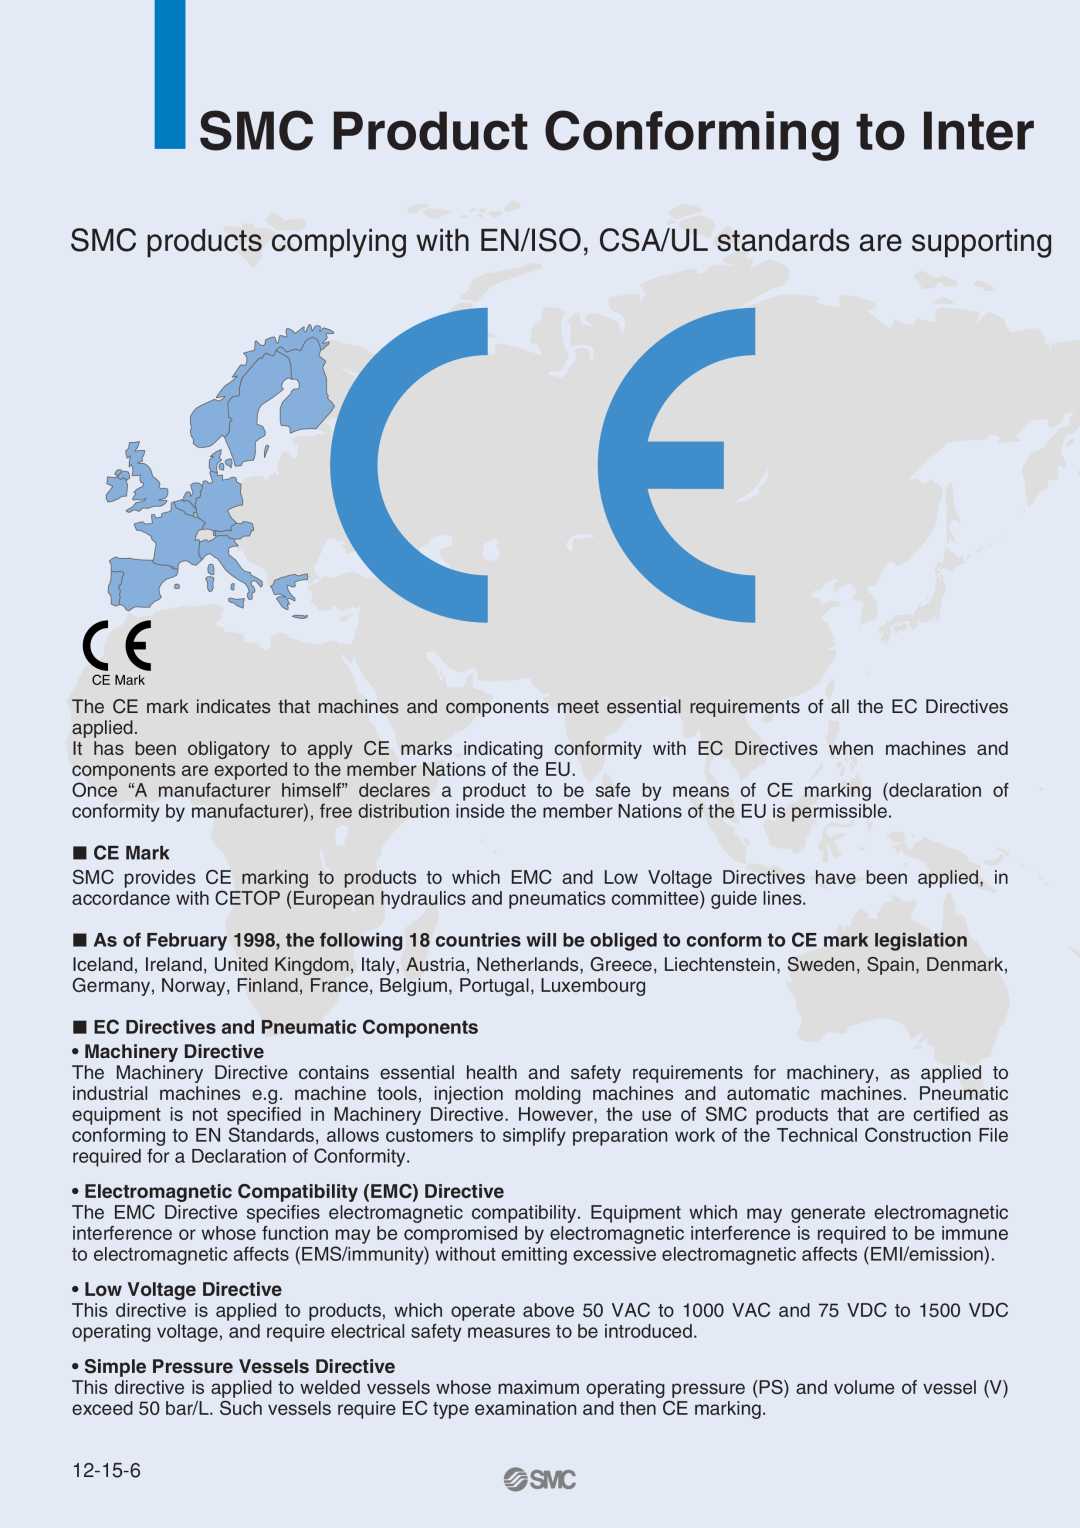 SMC Networks MHT2 manual SMC Product Conforming to Inter, 12-15-6, CE Mark, EC Directives and Pneumatic Components 